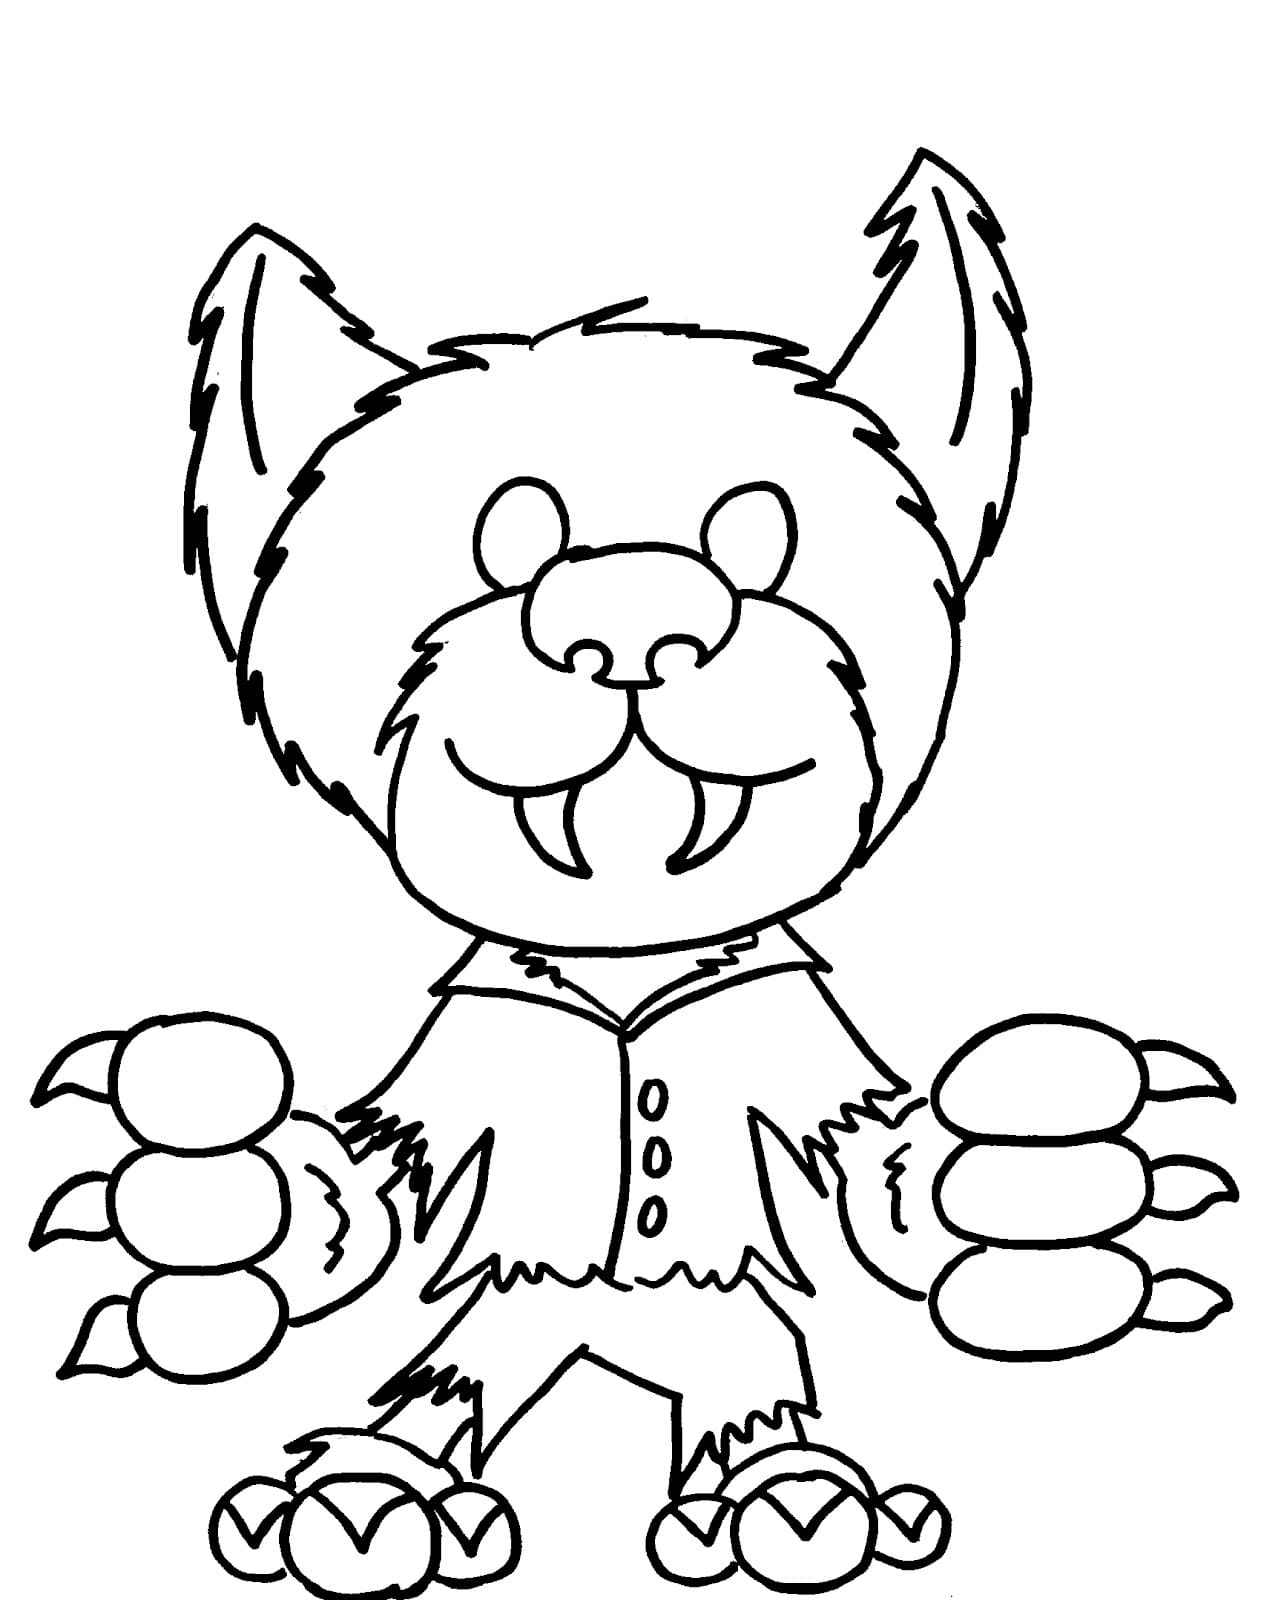 Funny Werewolf Free Printable Coloring Page